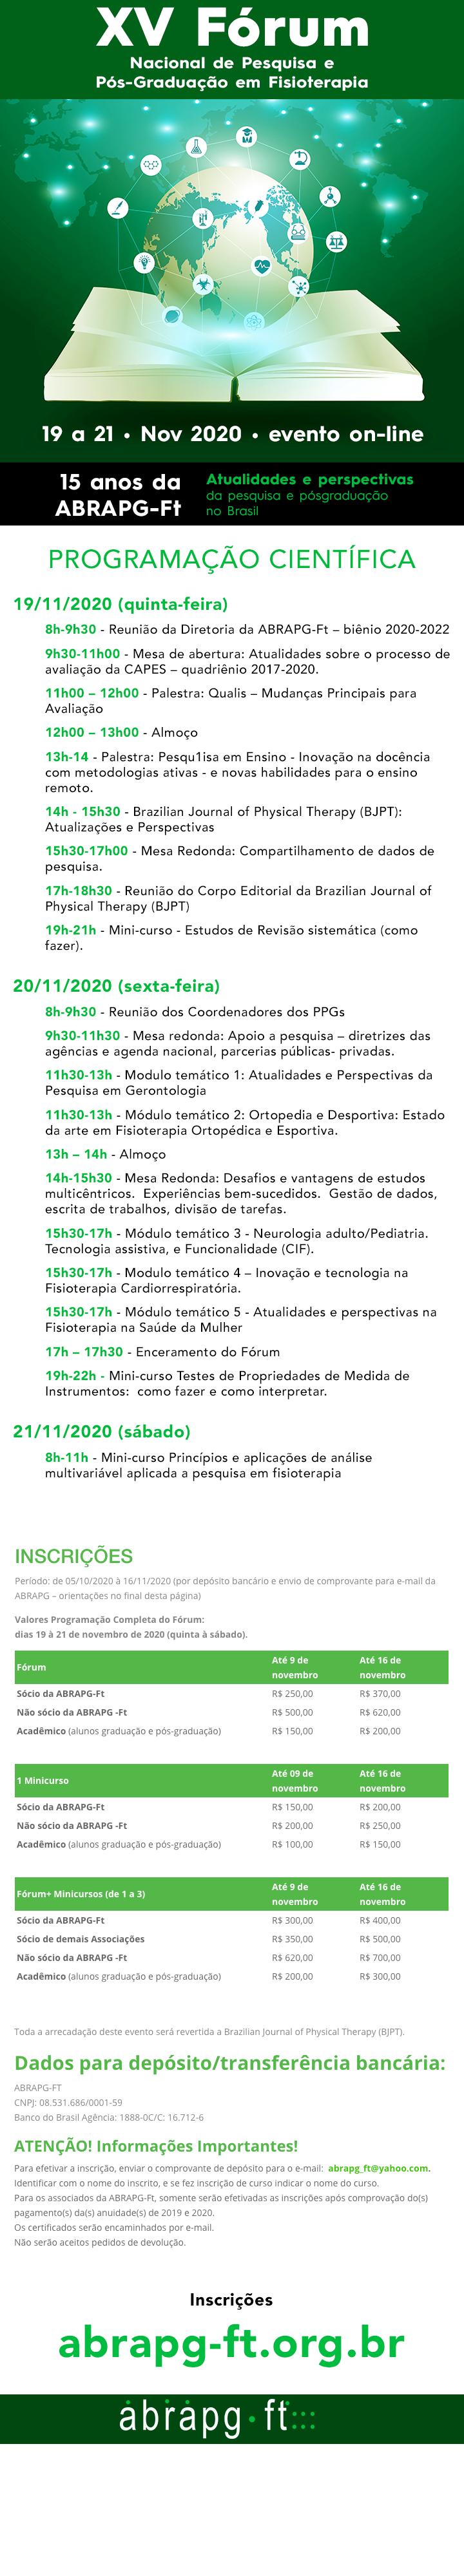 XV_email_mkt-livro.png